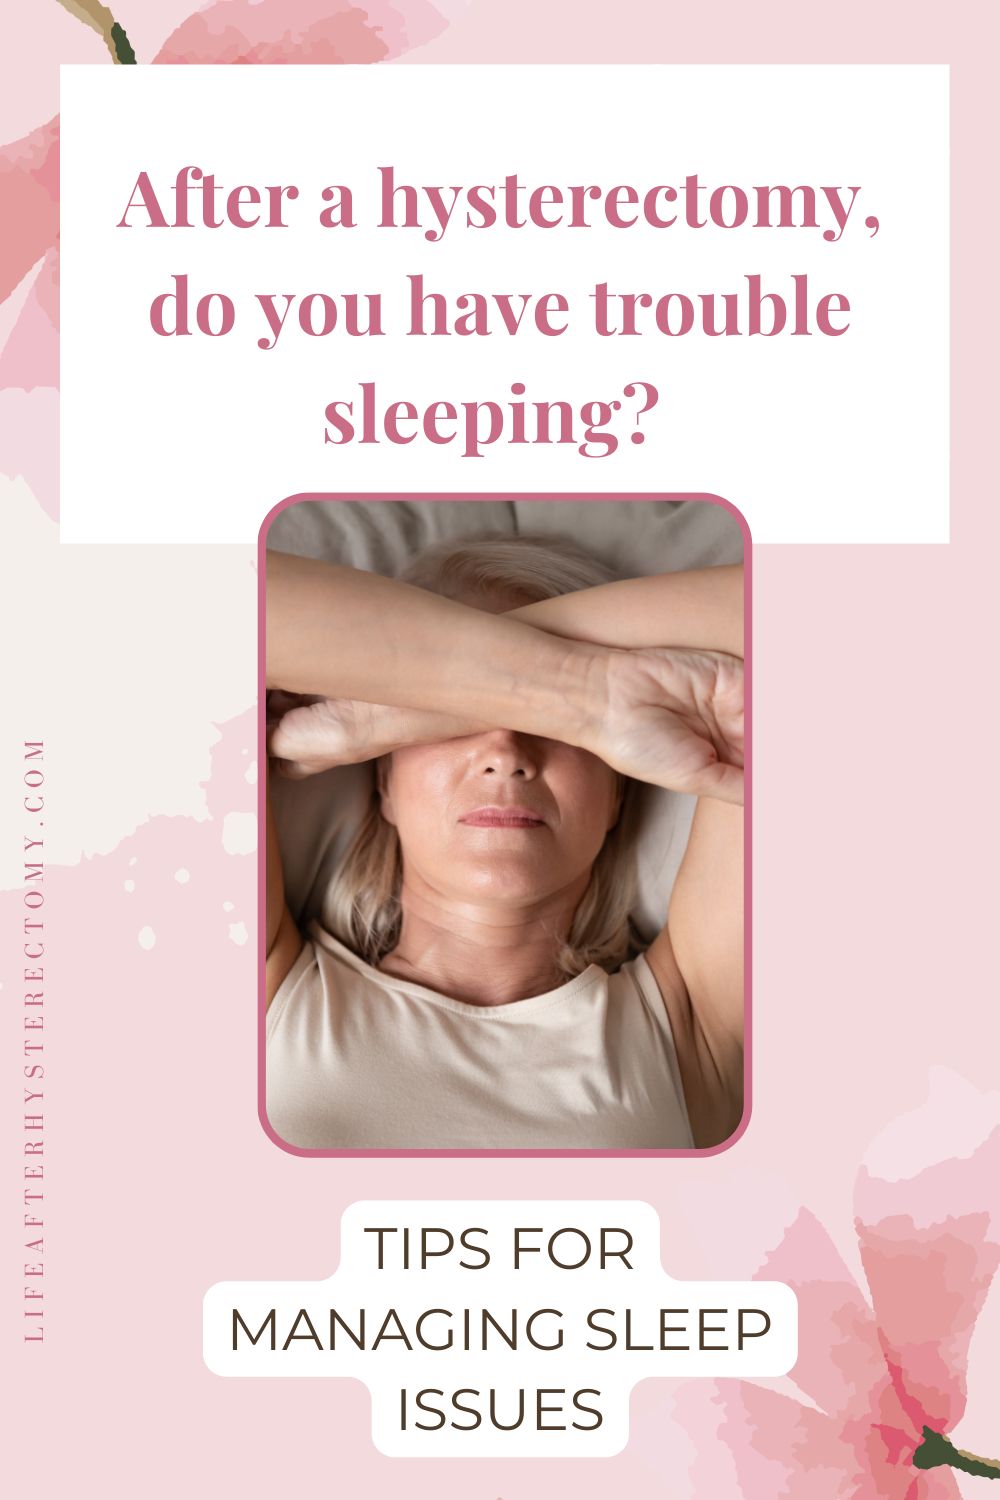 Trouble sleeping after hysterectomy - 10 Tips for Managing Sleep Issues